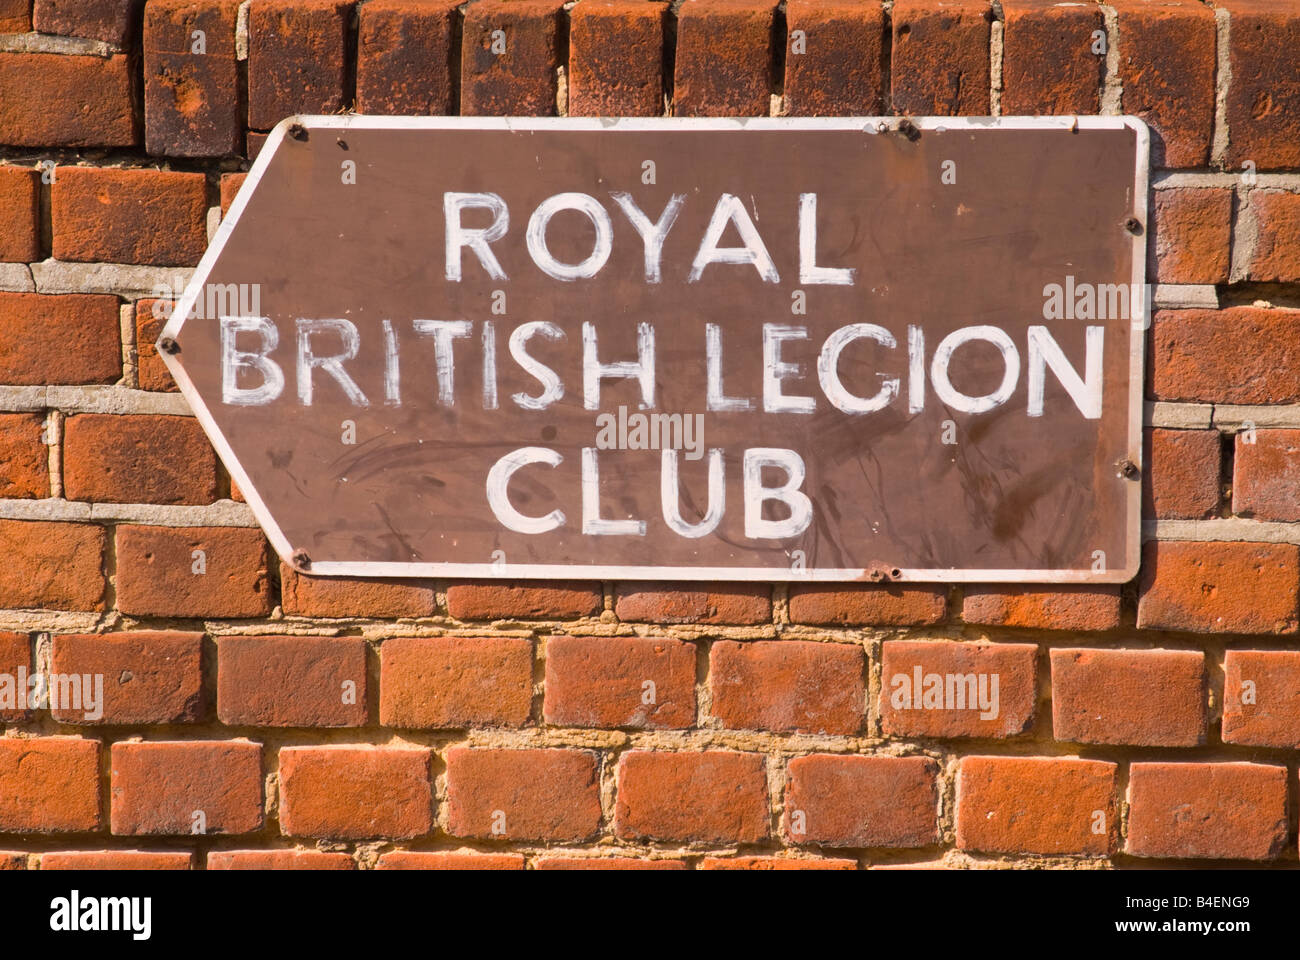 Sign pointing to The Royal British Legion Club in Uk Stock Photo